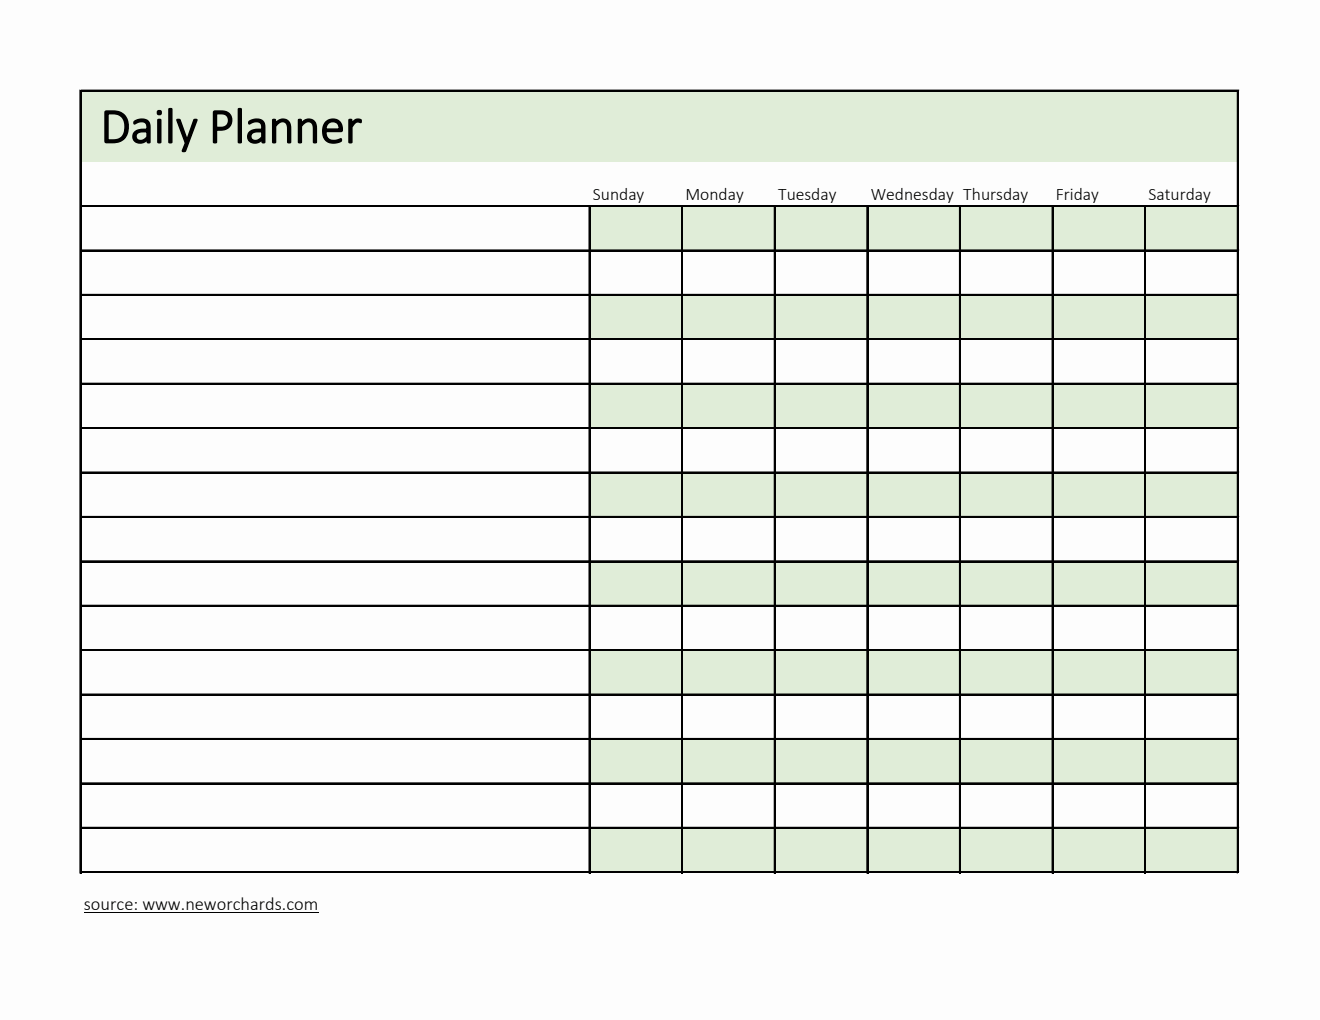 Daily Planner and Checklist Template in Excel (Downloadable)